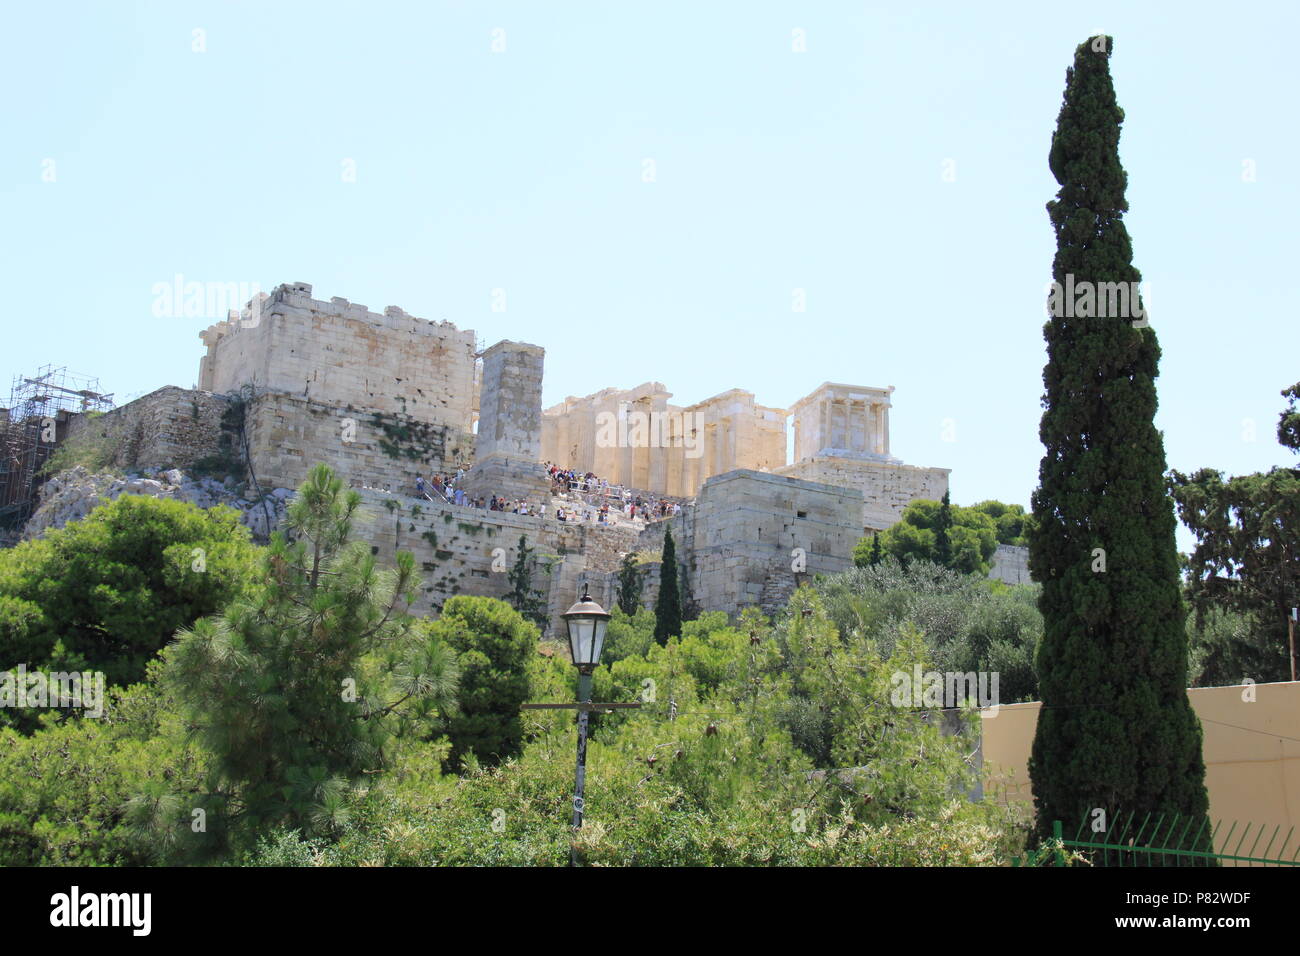 View towards the Acropolis (an ancient citadel located on a rocky outcrop) above the city of Athens, GREECE, PETER GRANT Stock Photo